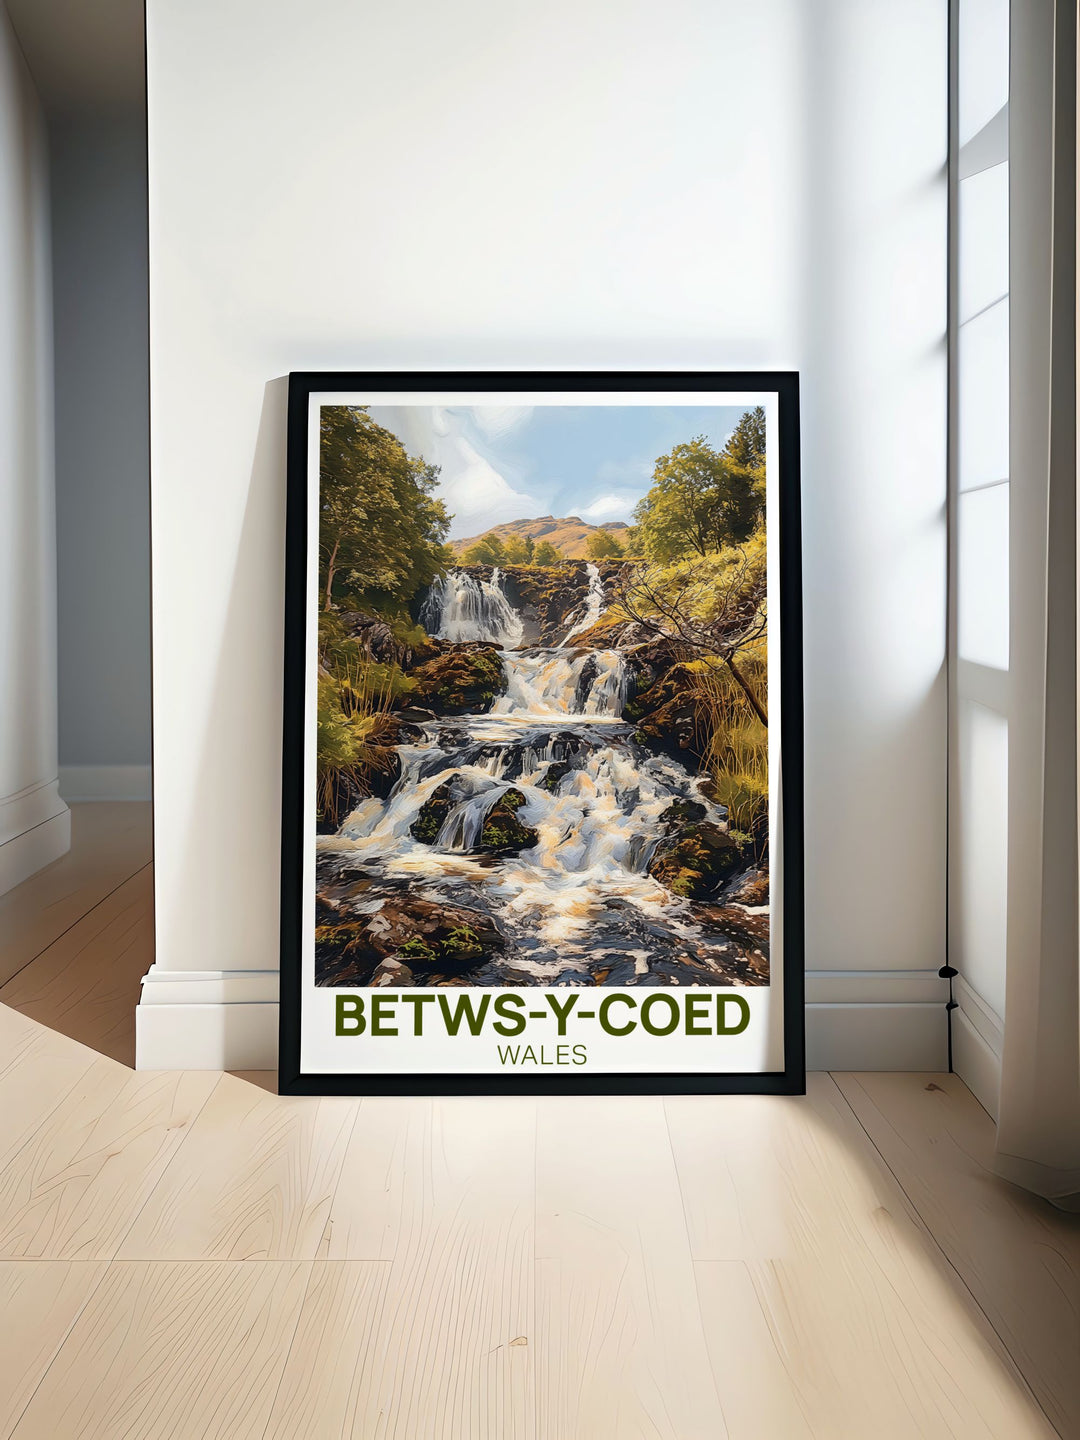 Betws y Coed travel poster featuring the picturesque village nestled in the lush Welsh countryside perfect for adding a touch of nature and history to your home decor Swallow Falls is also beautifully highlighted in this stunning artwork.